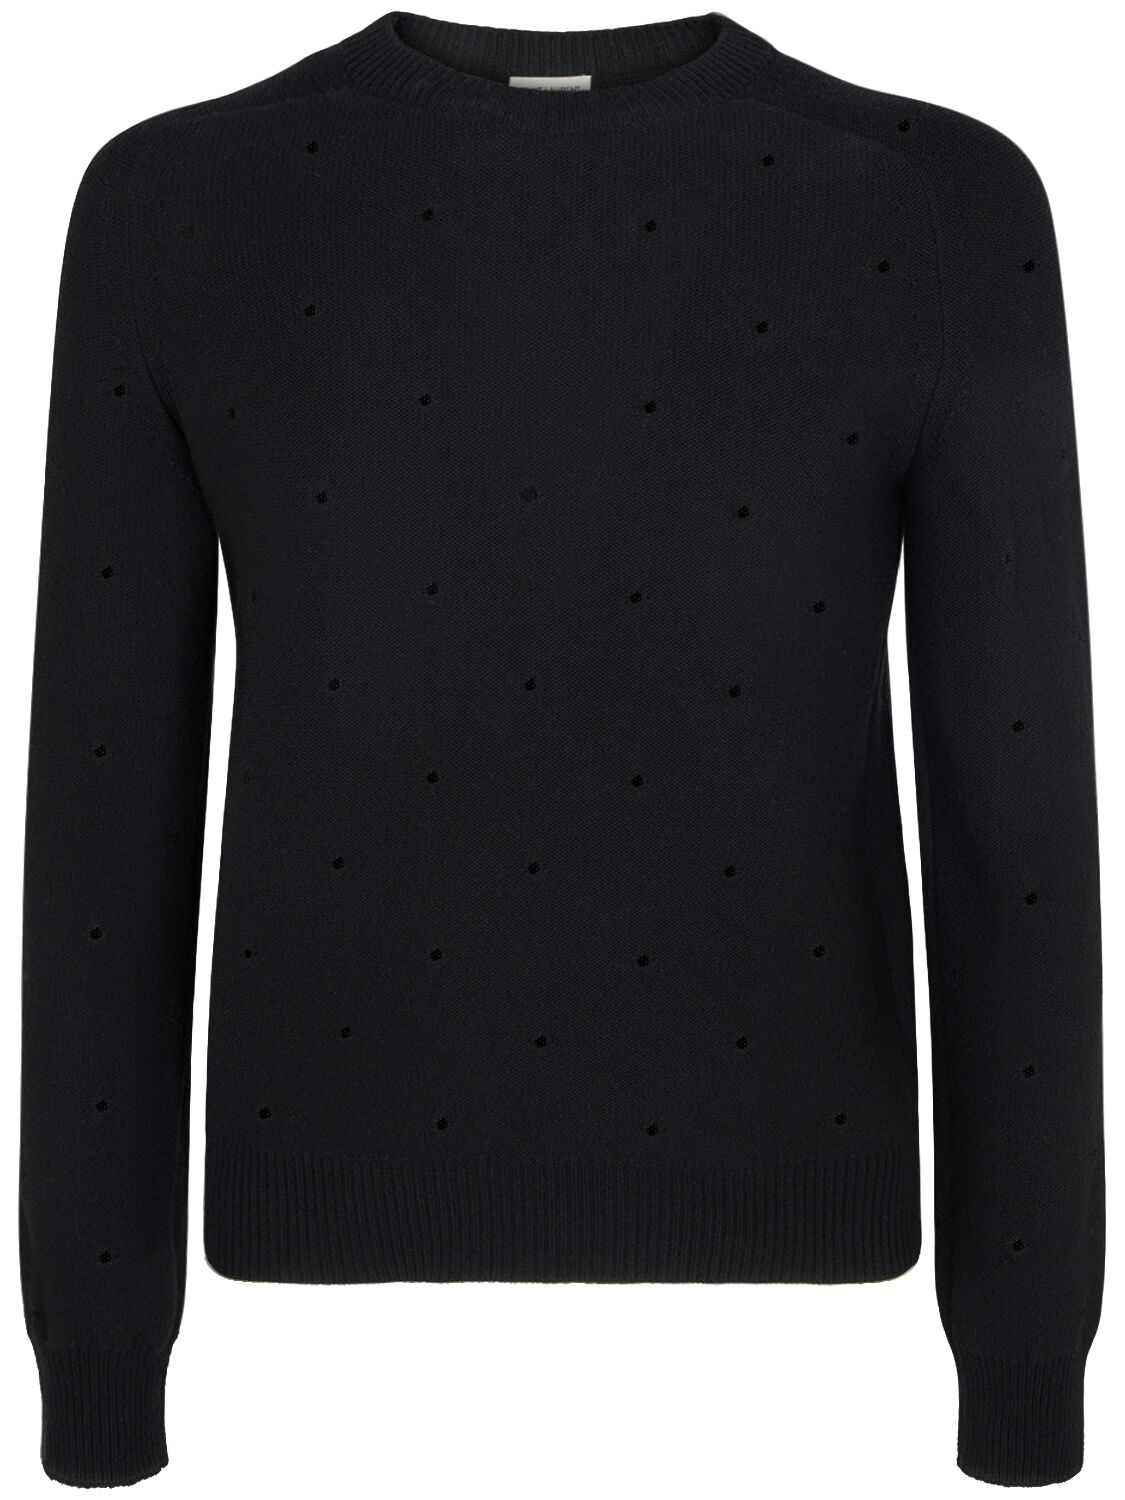 Image of Wool Knit Crewneck Sweater W/crystals